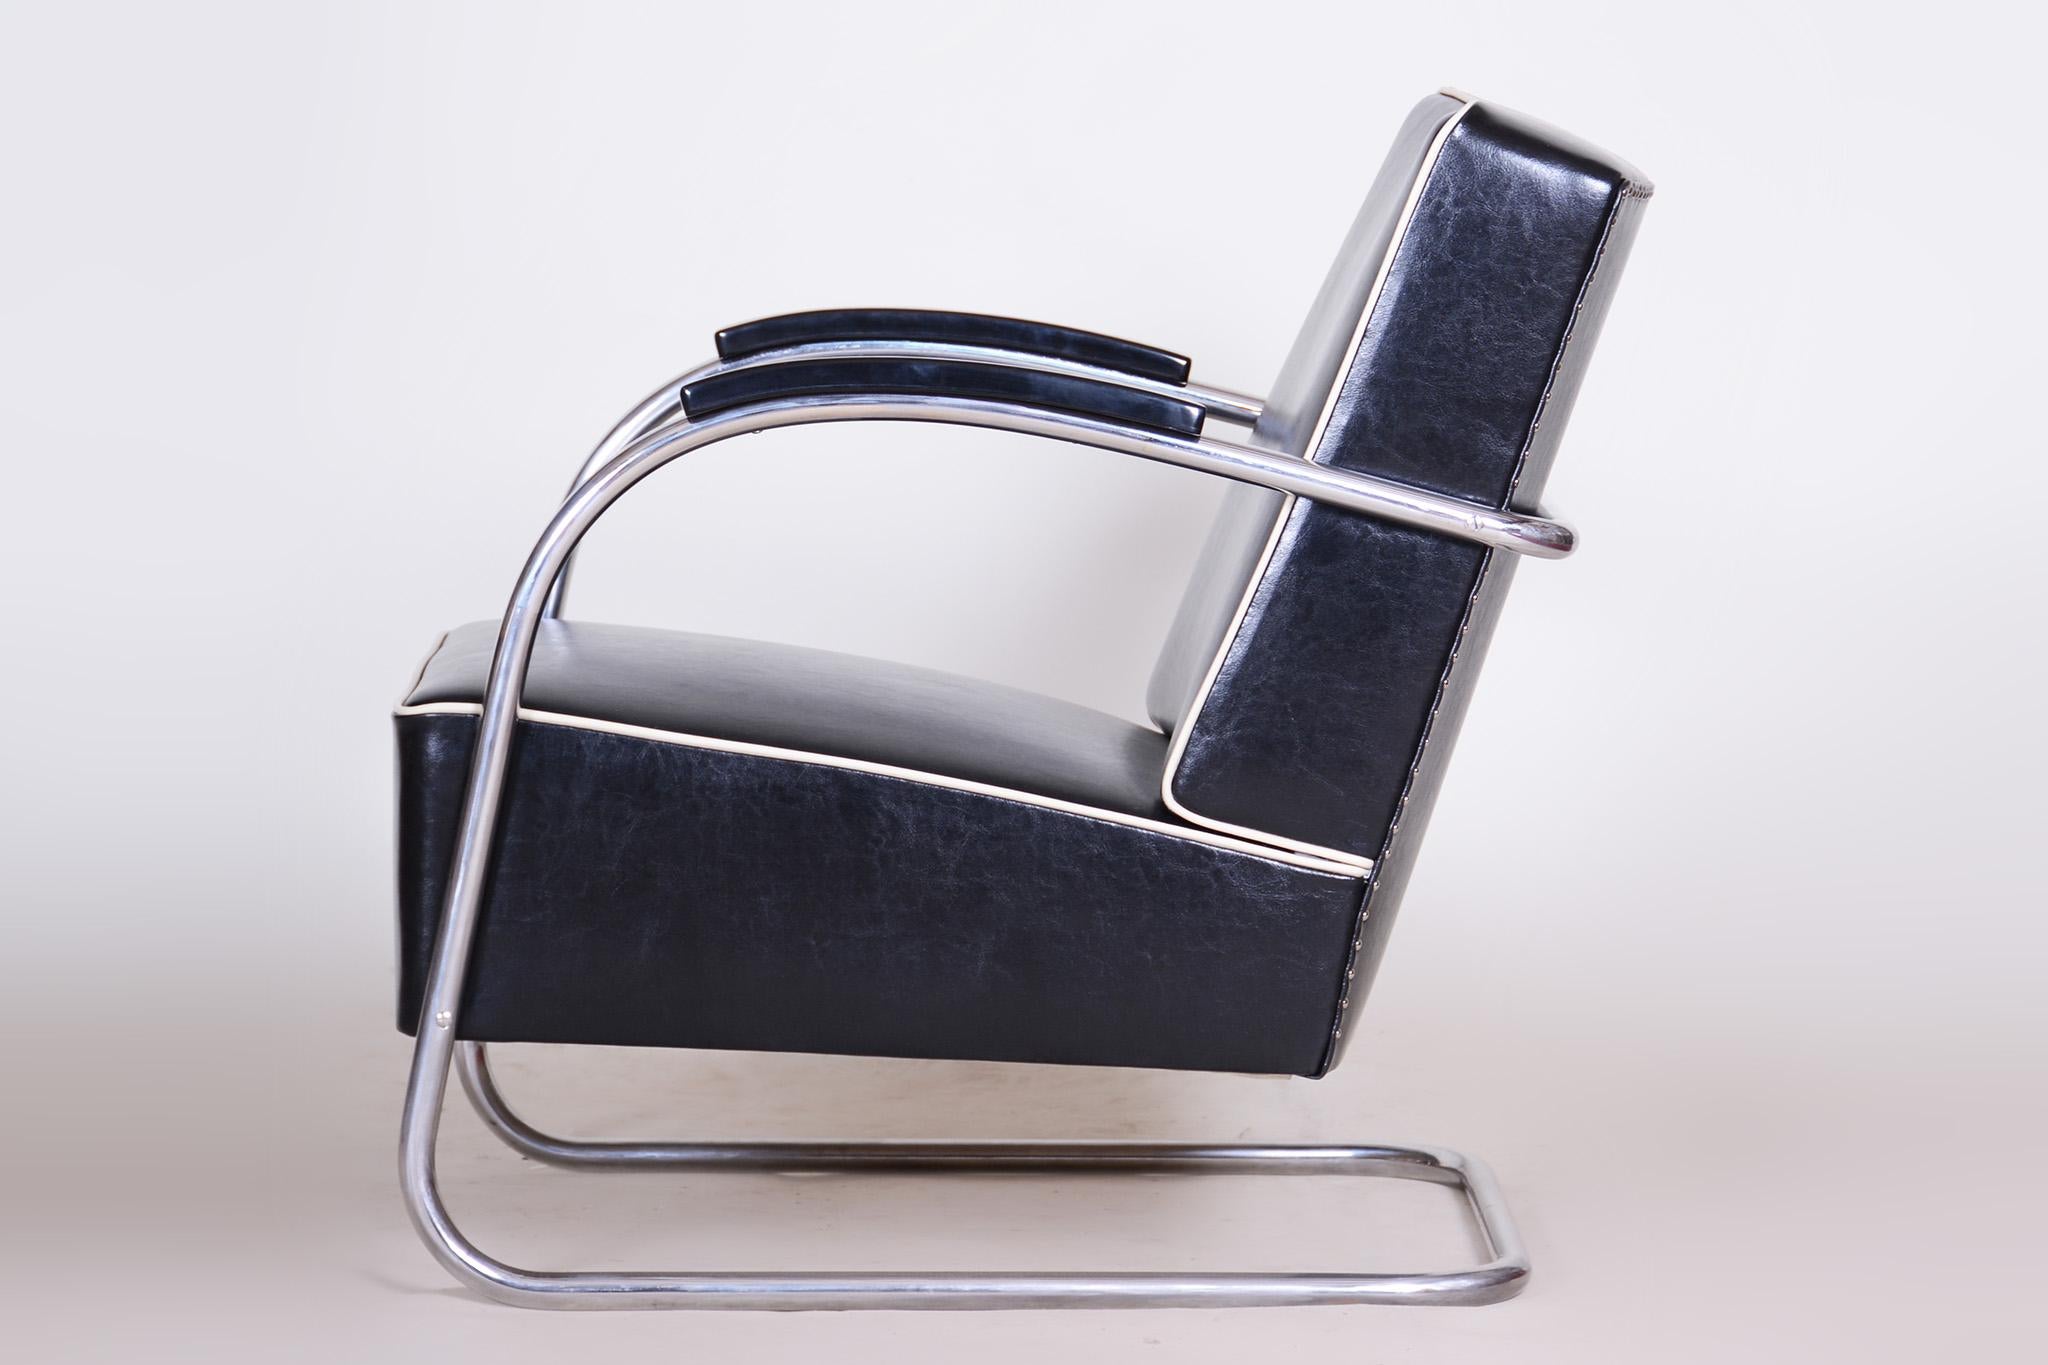 Pair of Black Bauhaus Armchairs, Made by Mucke Melder in 1930s Czechia For Sale 6